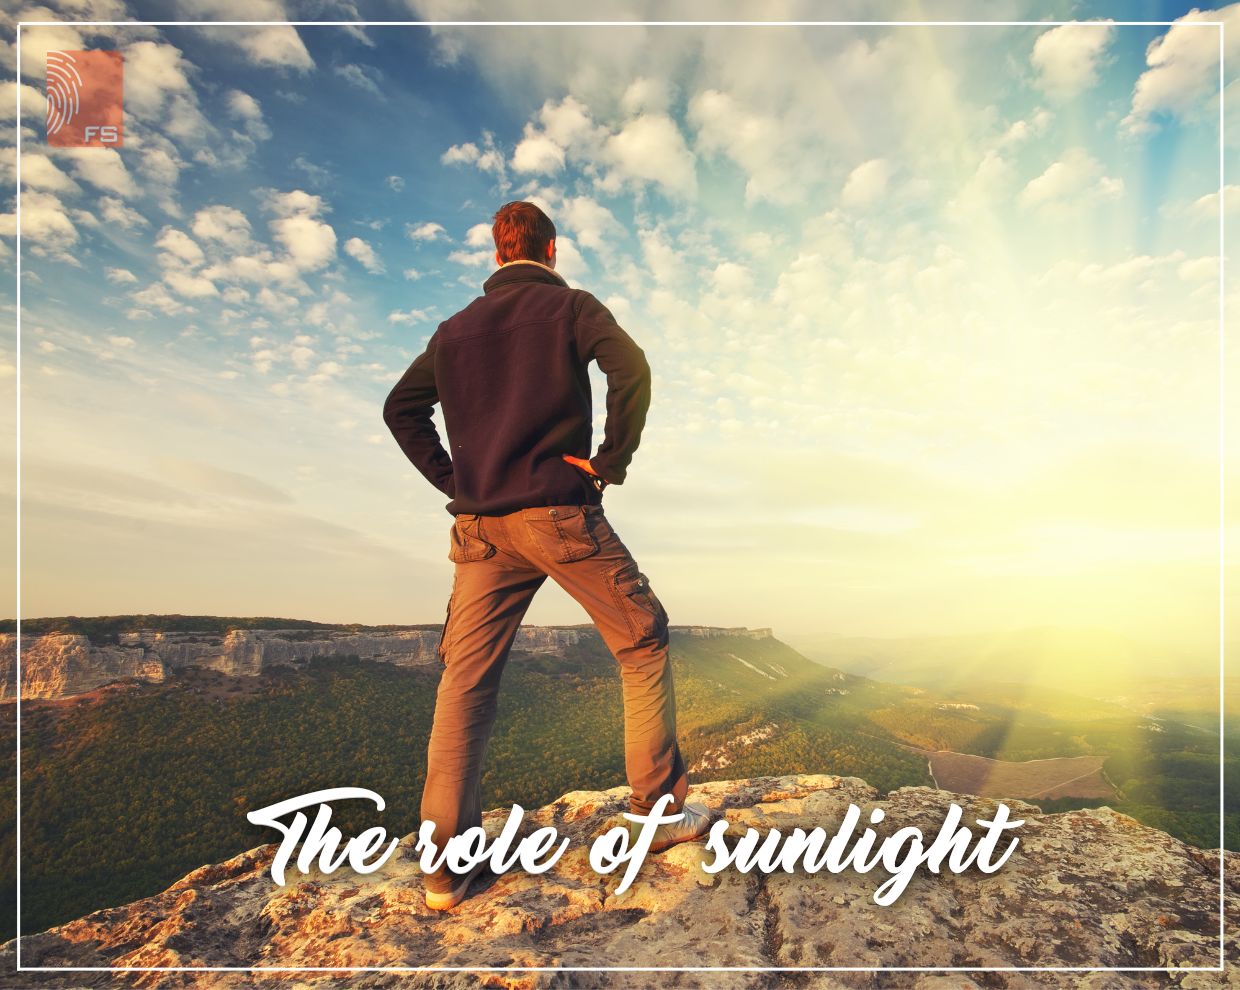 The role of sunlight